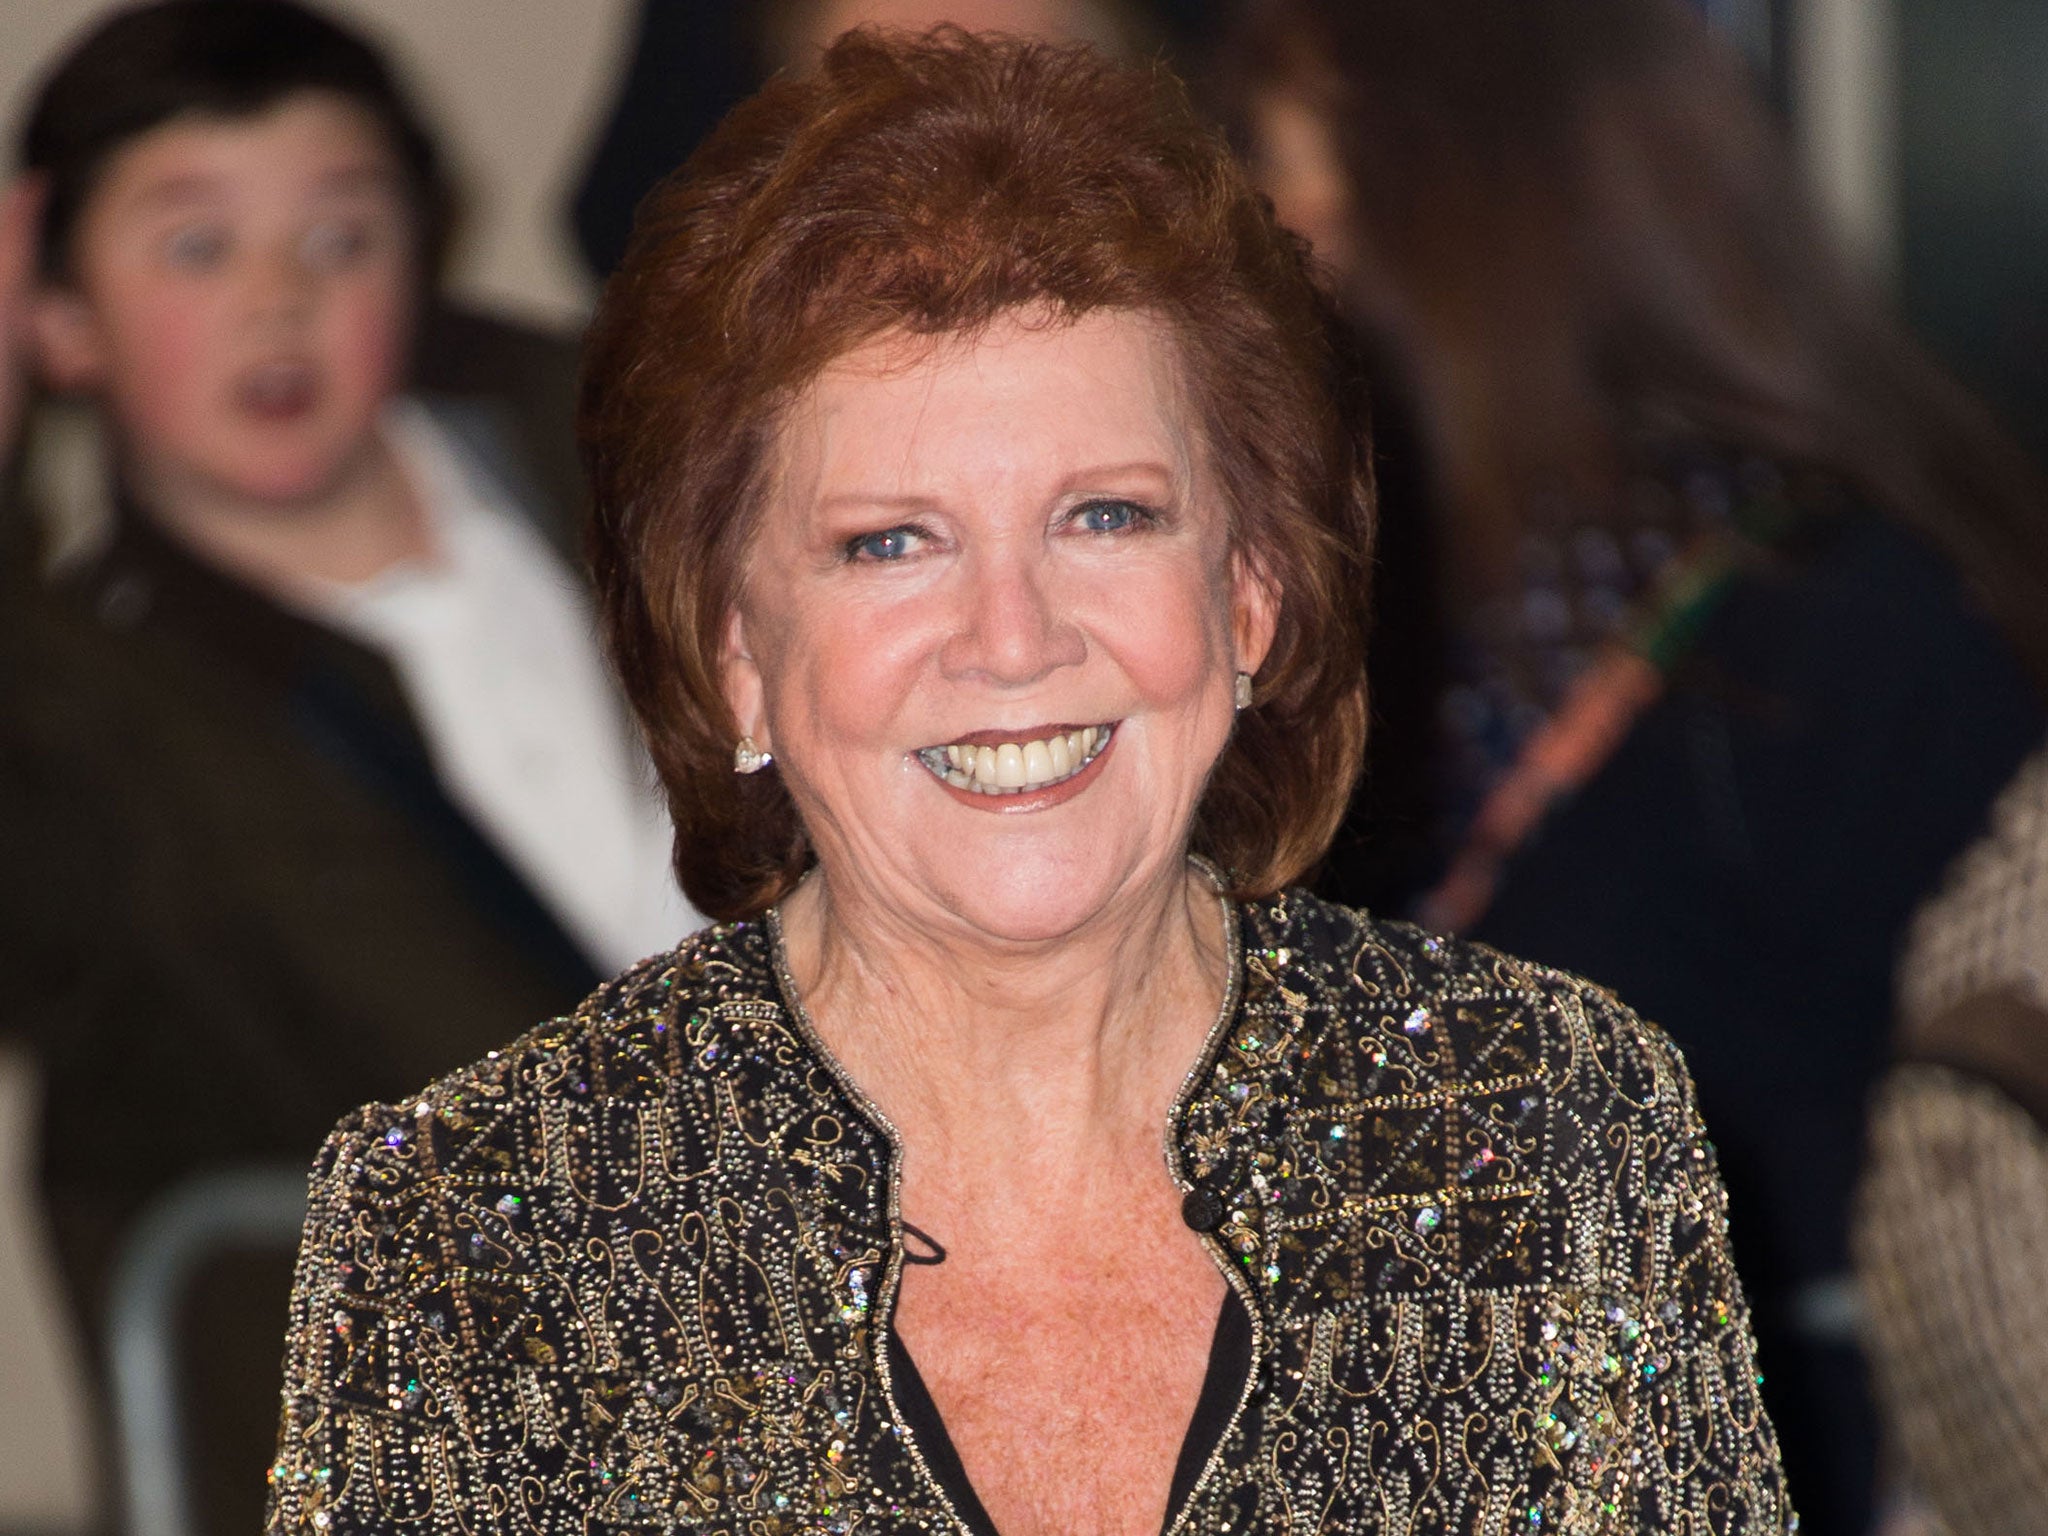 Thieves were planning to target Cilla Black's home, according to her publicist